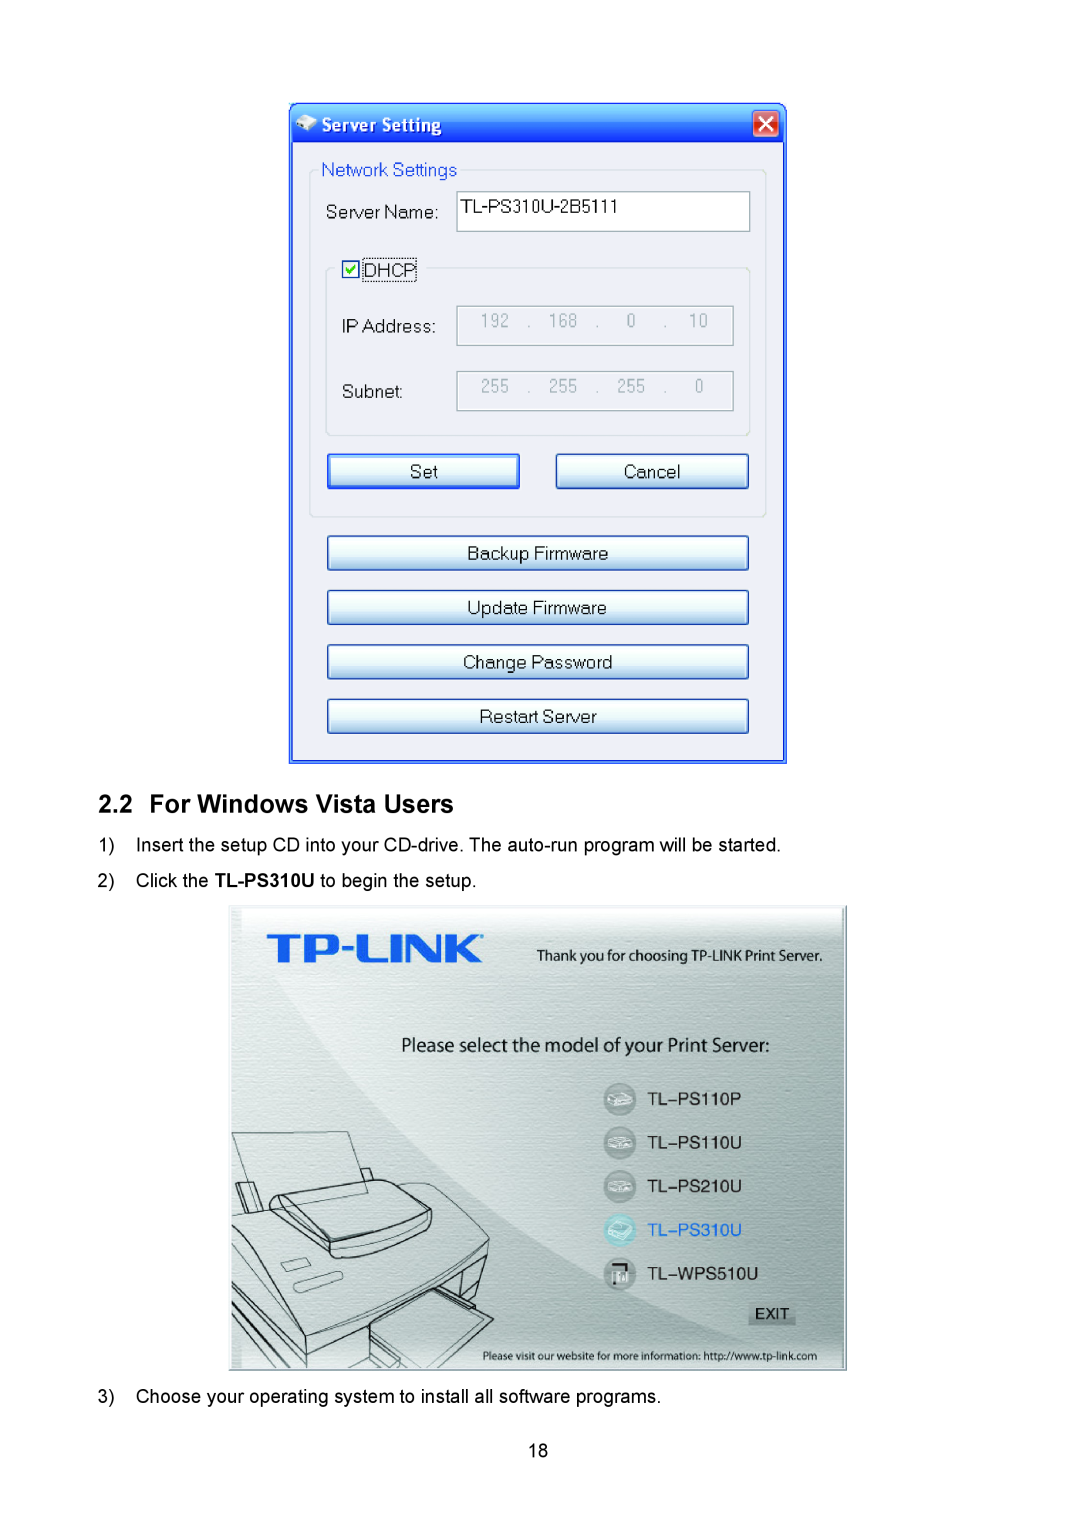 TP-Link manual For Windows Vista Users, Click the TL-PS310U to begin the setup 